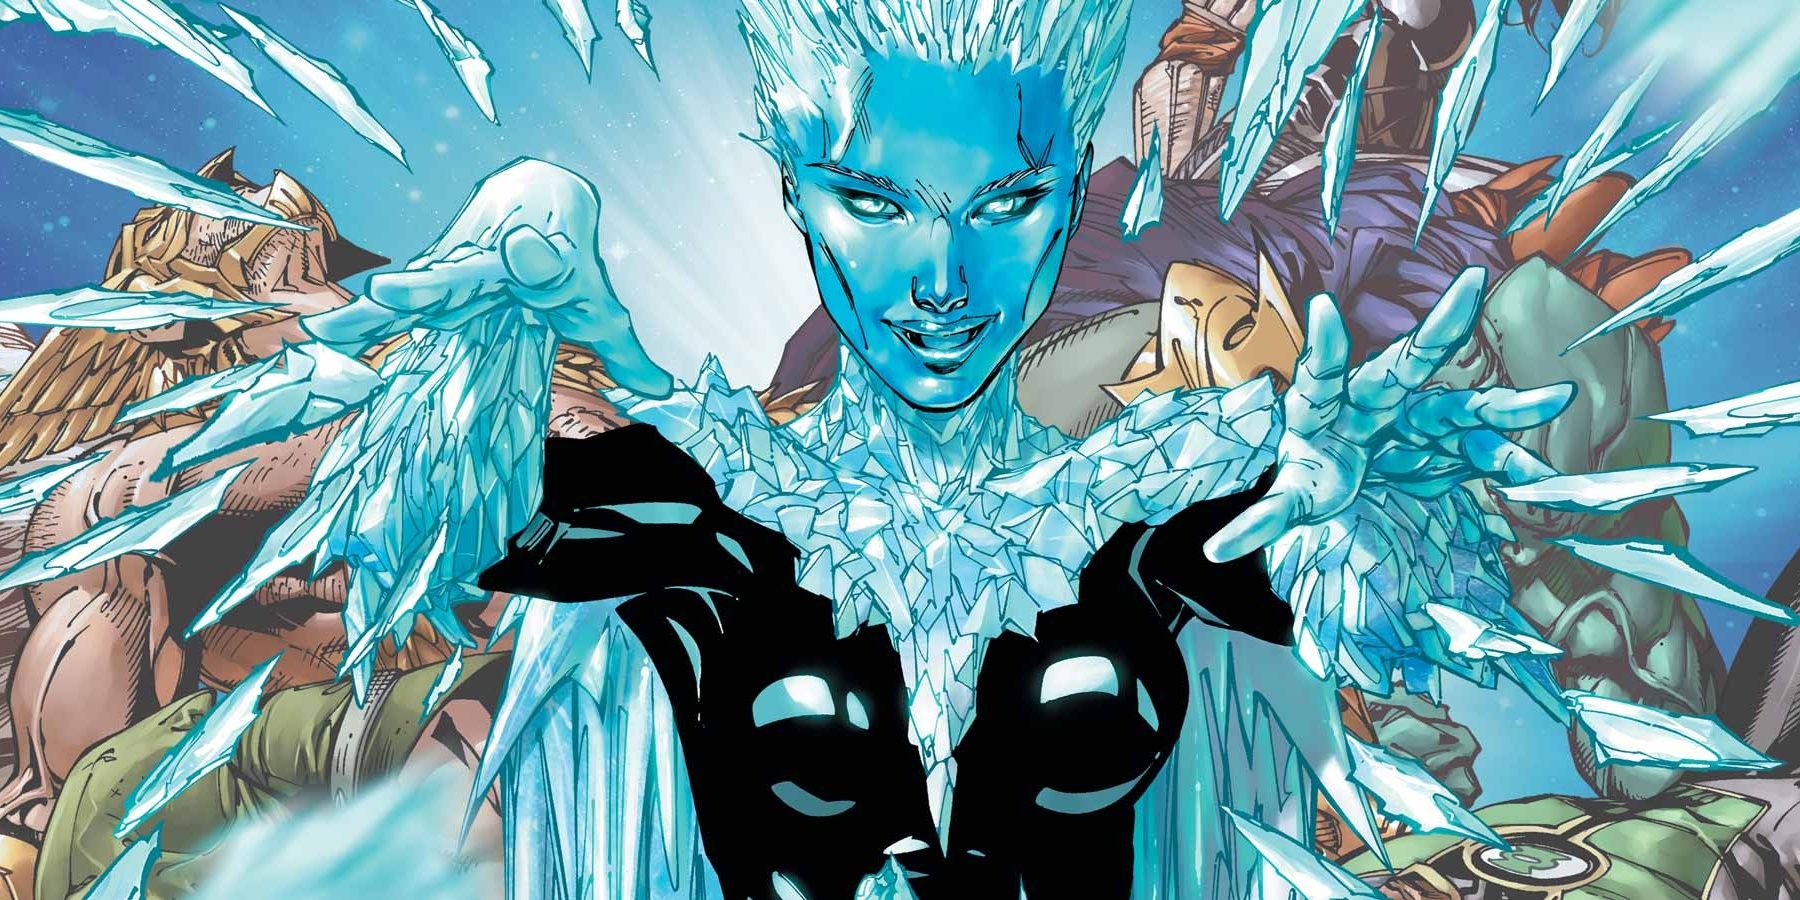 Killer Frost fires deadly icicles from her fingers in DC Comics.